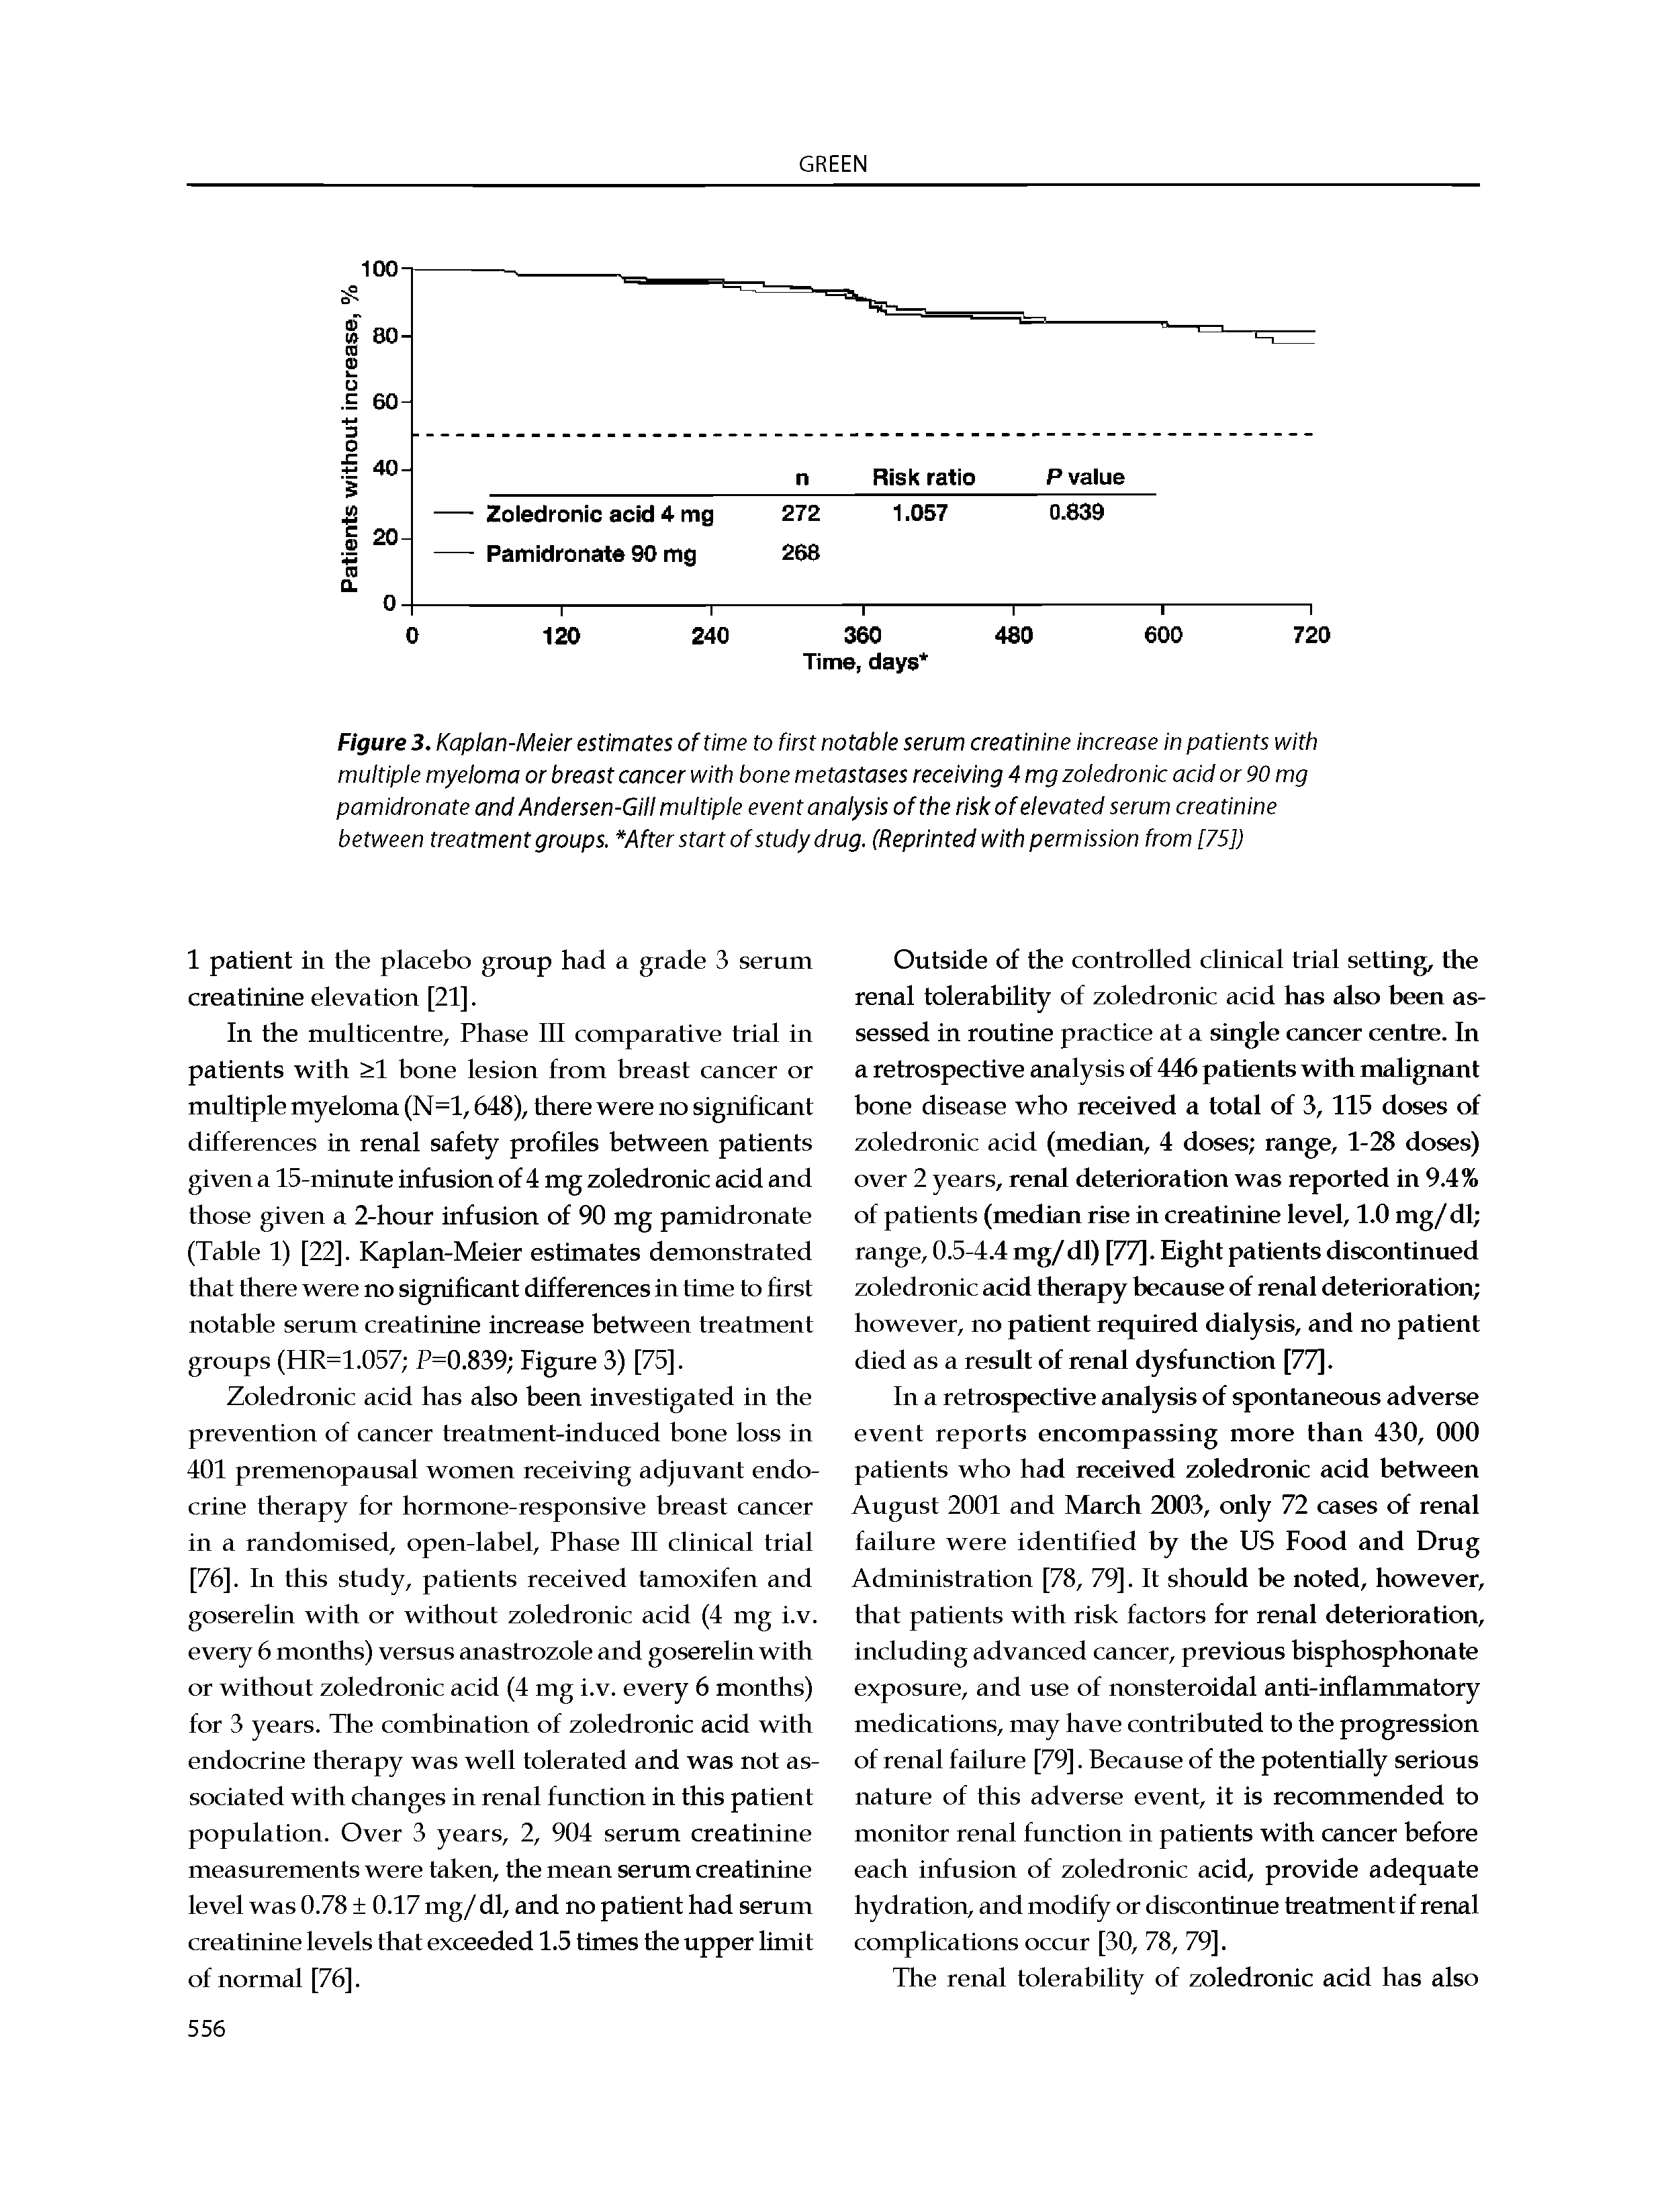 Figures. Kaplan-Meier estimates of time to first notable serum creatinine increase in patients with multiple myeloma or breast cancer with bone metastases receiving 4 mg zoledronic acid or 90 mg pamidronate and Andersen-Gill multiple event analysis of the risk of elevated serum creatinine between treatment groups. After start of study drug. (Reprinted with permission from [75])...